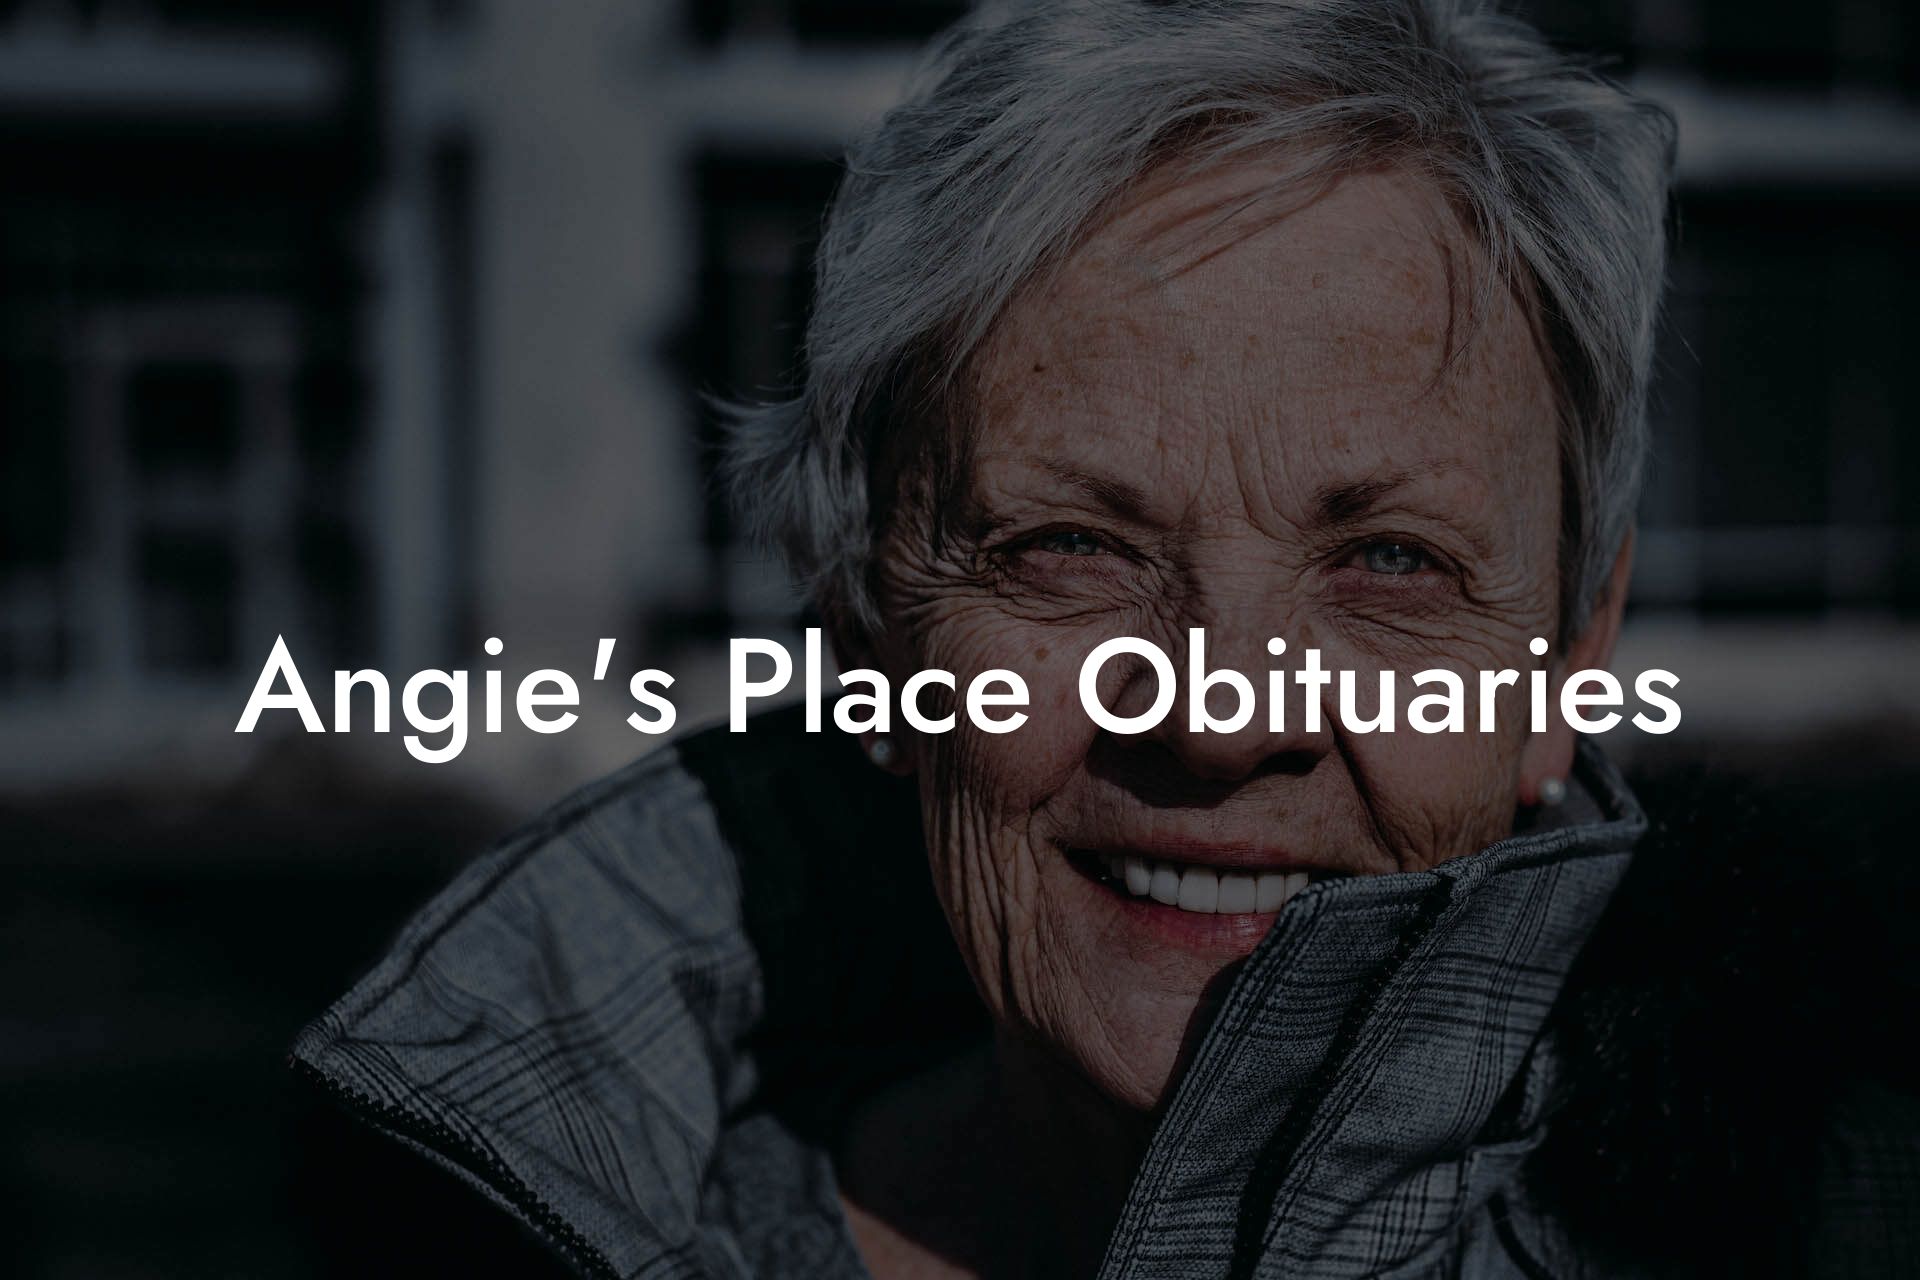 Angie's Place Obituaries